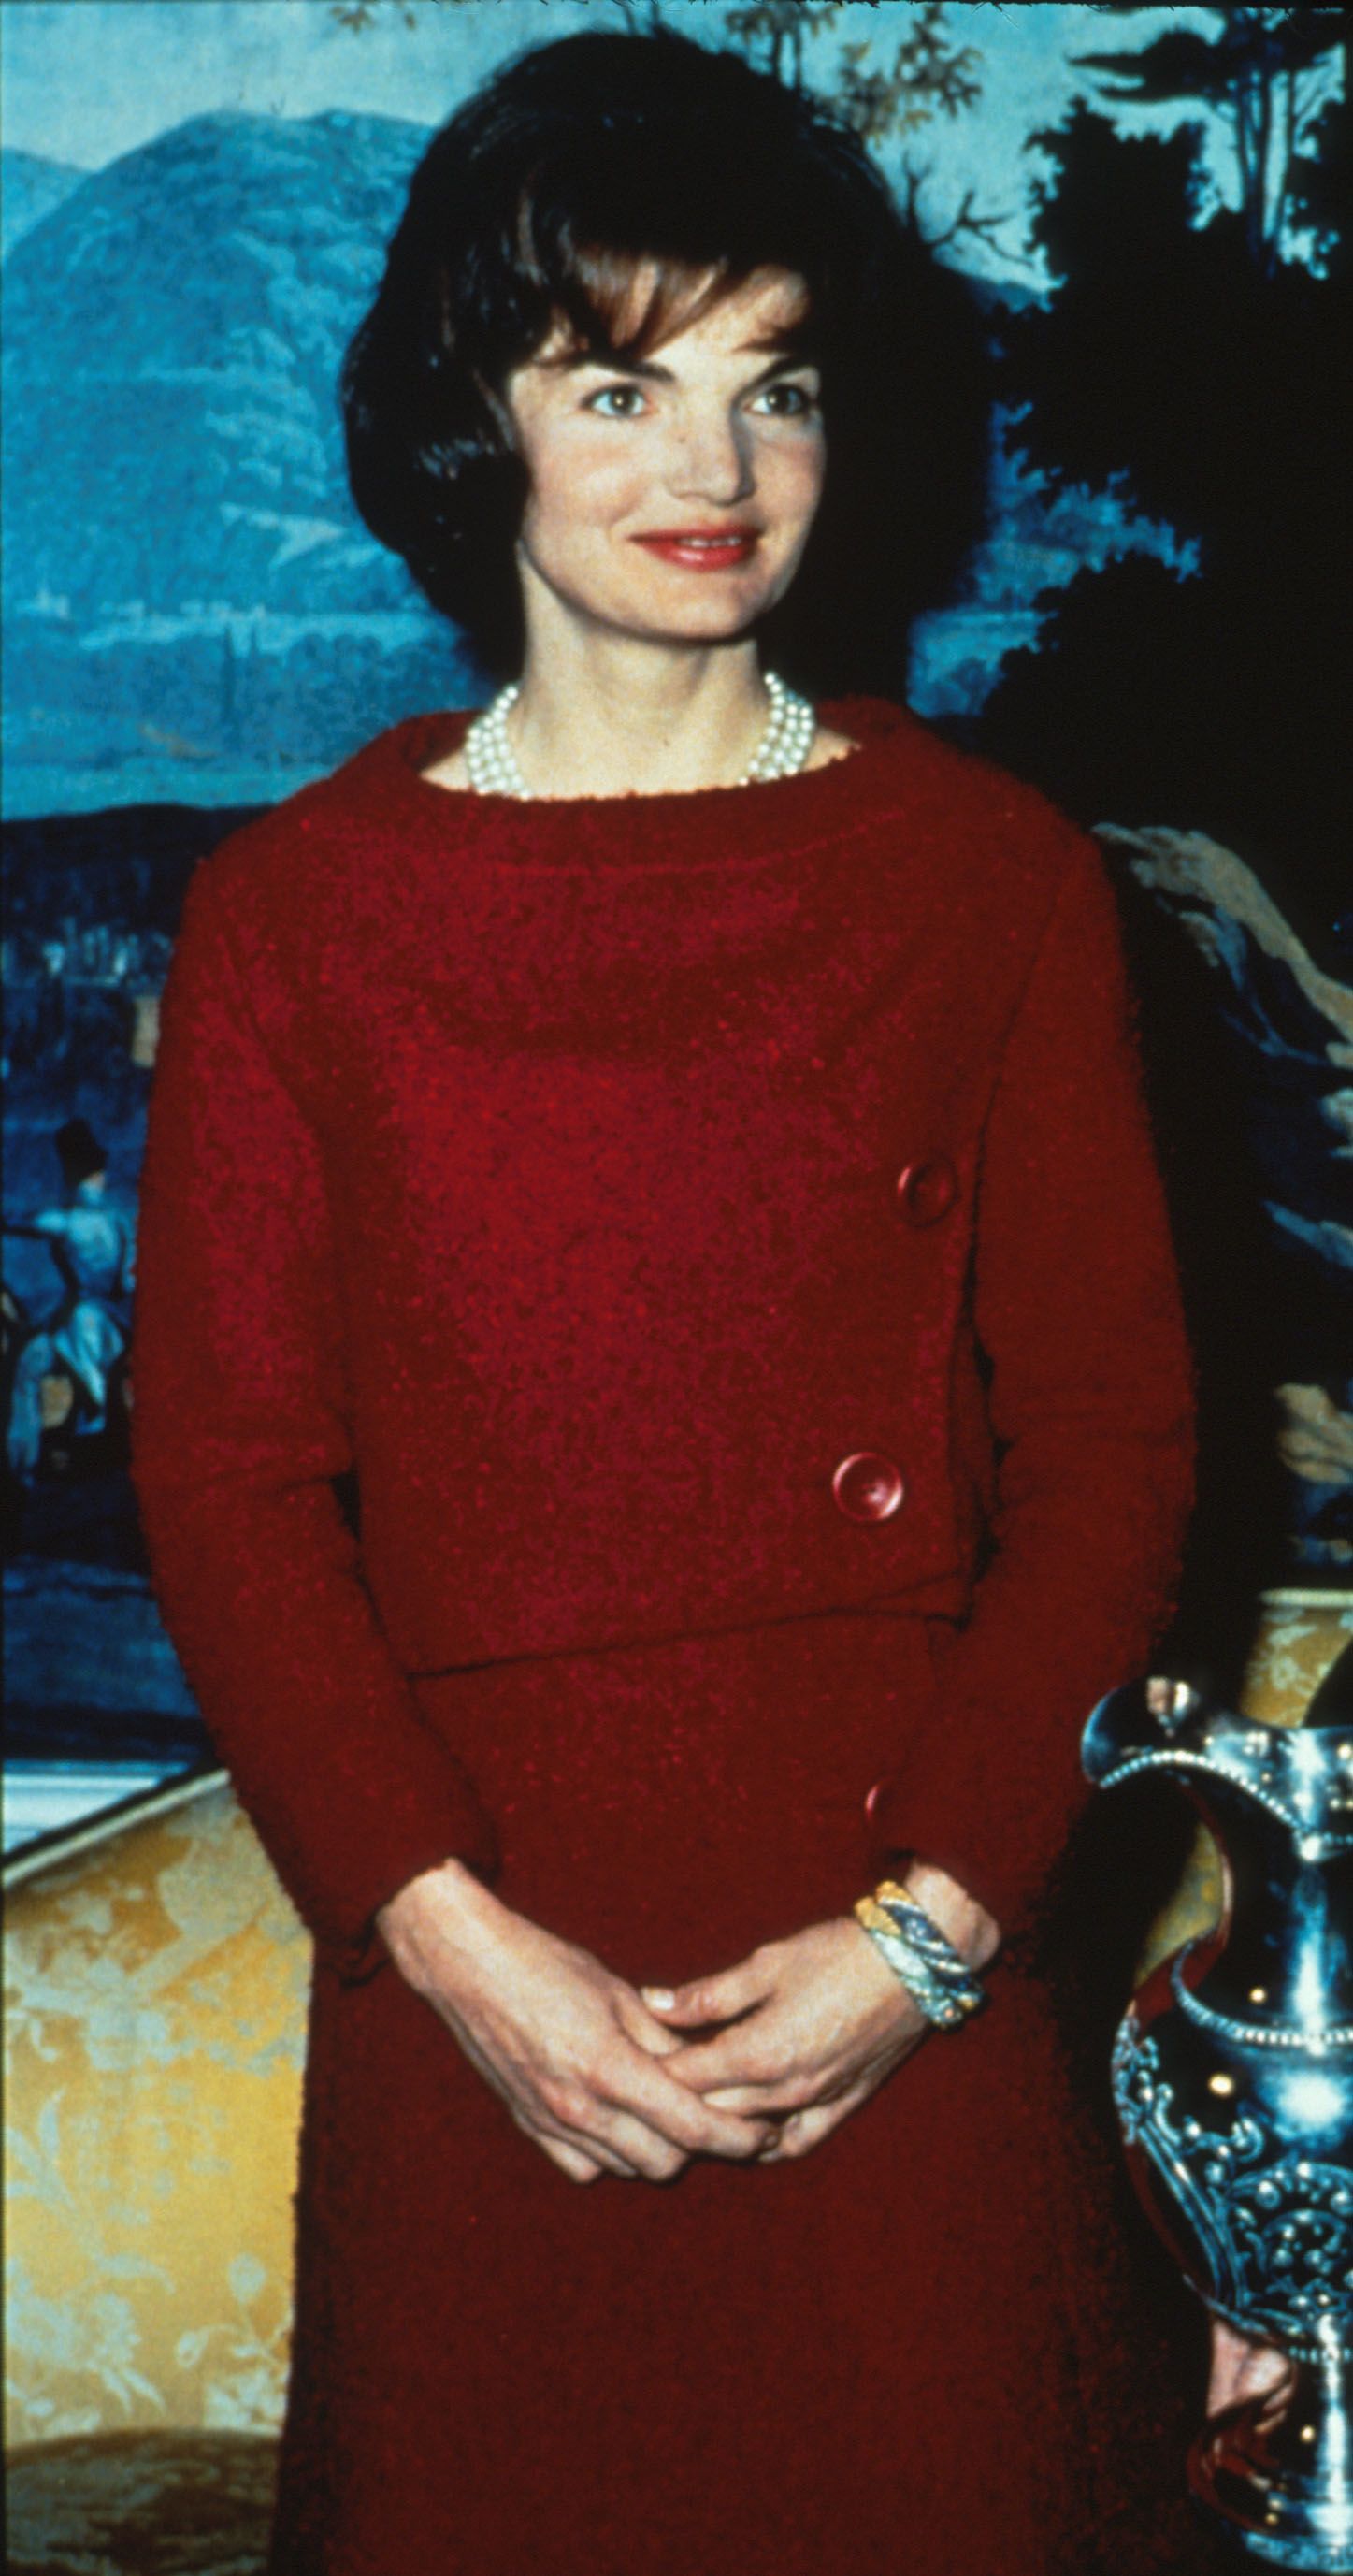 Jacqueline Kennedy on February 14, 1962, during a nationally televised Valentine's Day Tour of The White House in Washington, Dc. | Source: Getty Images